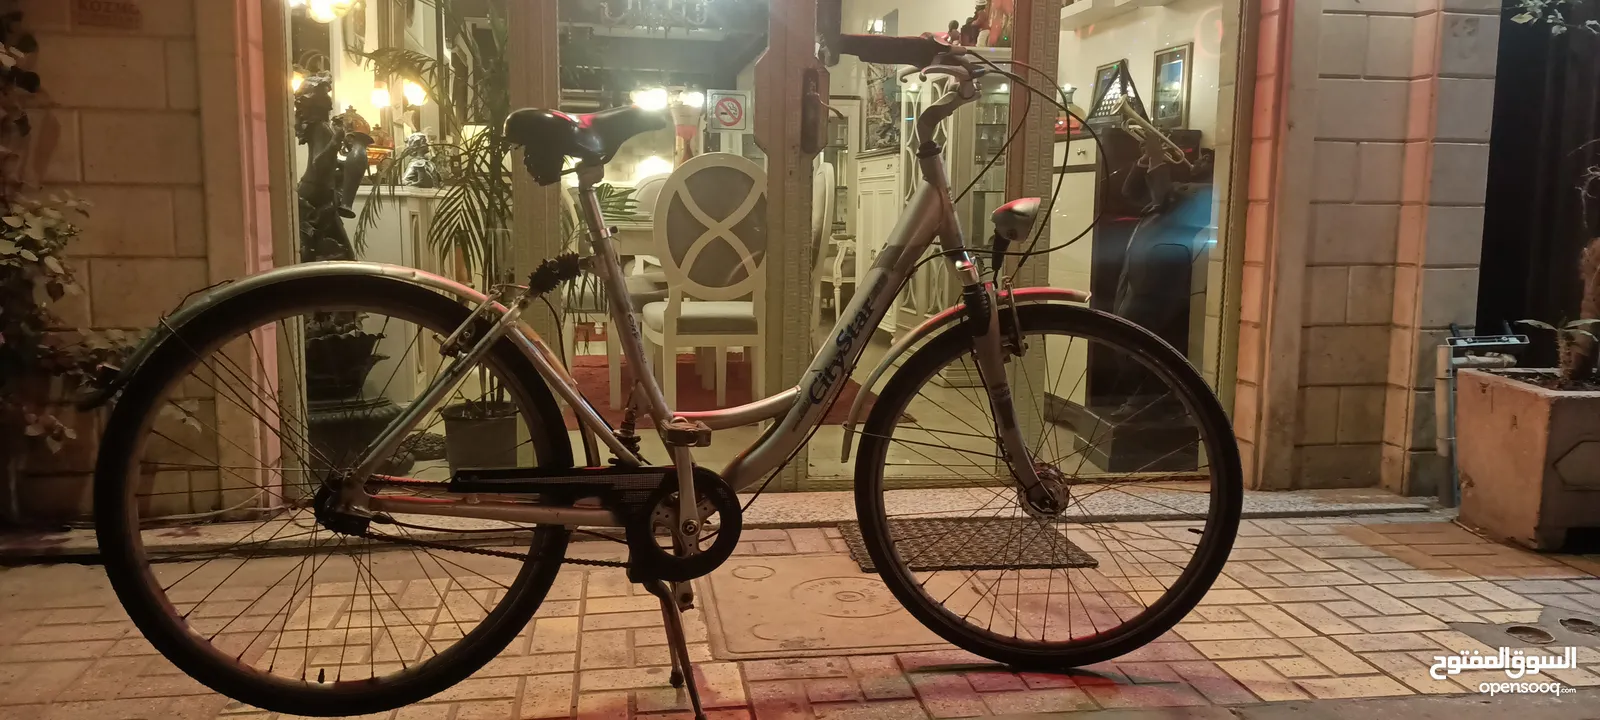 City star bicycle 28